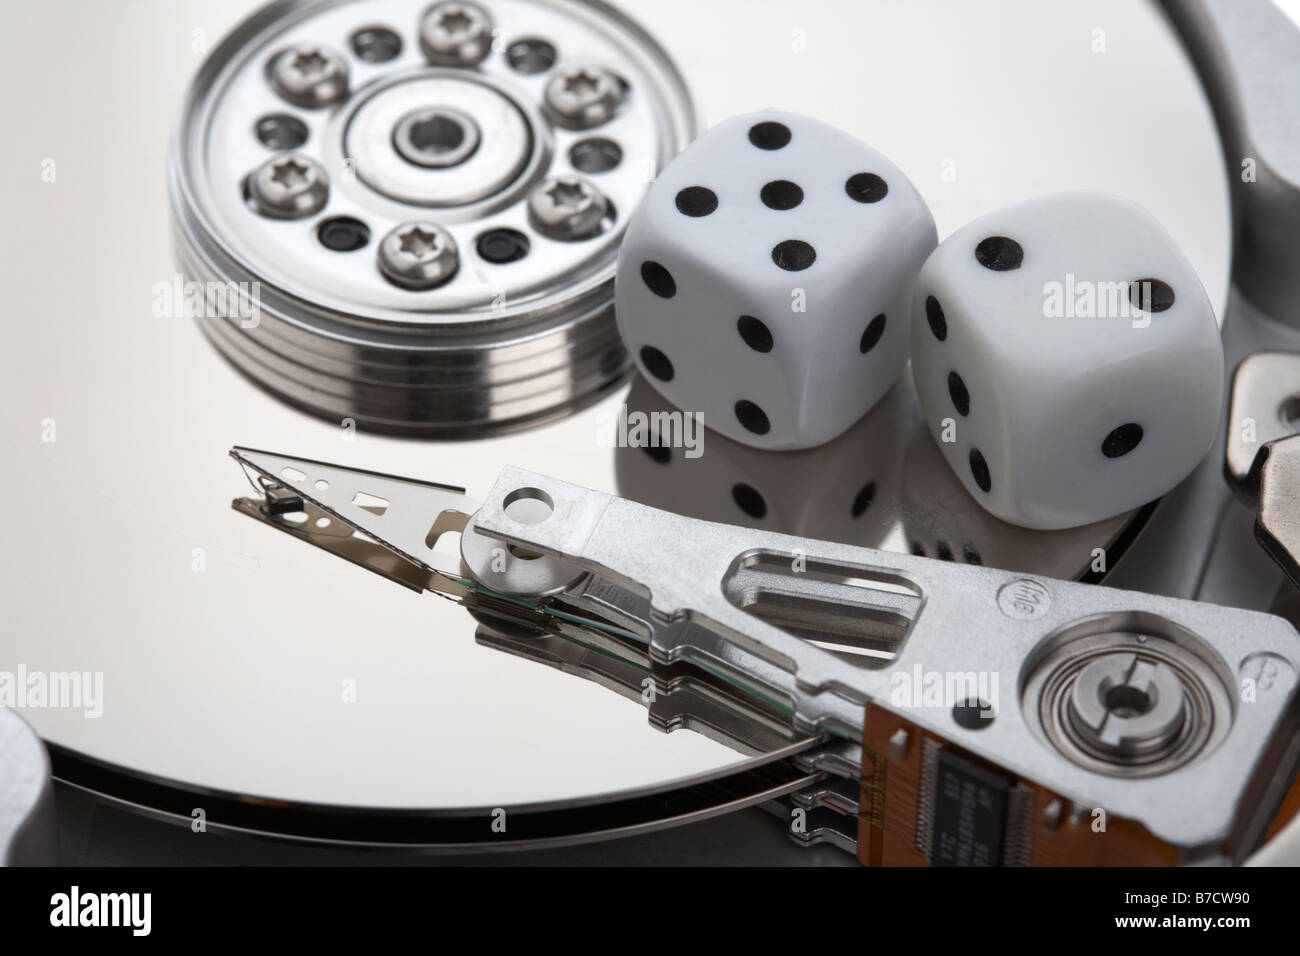 pair of dice sitting on the open platter of a computer hard drive Stock Photo